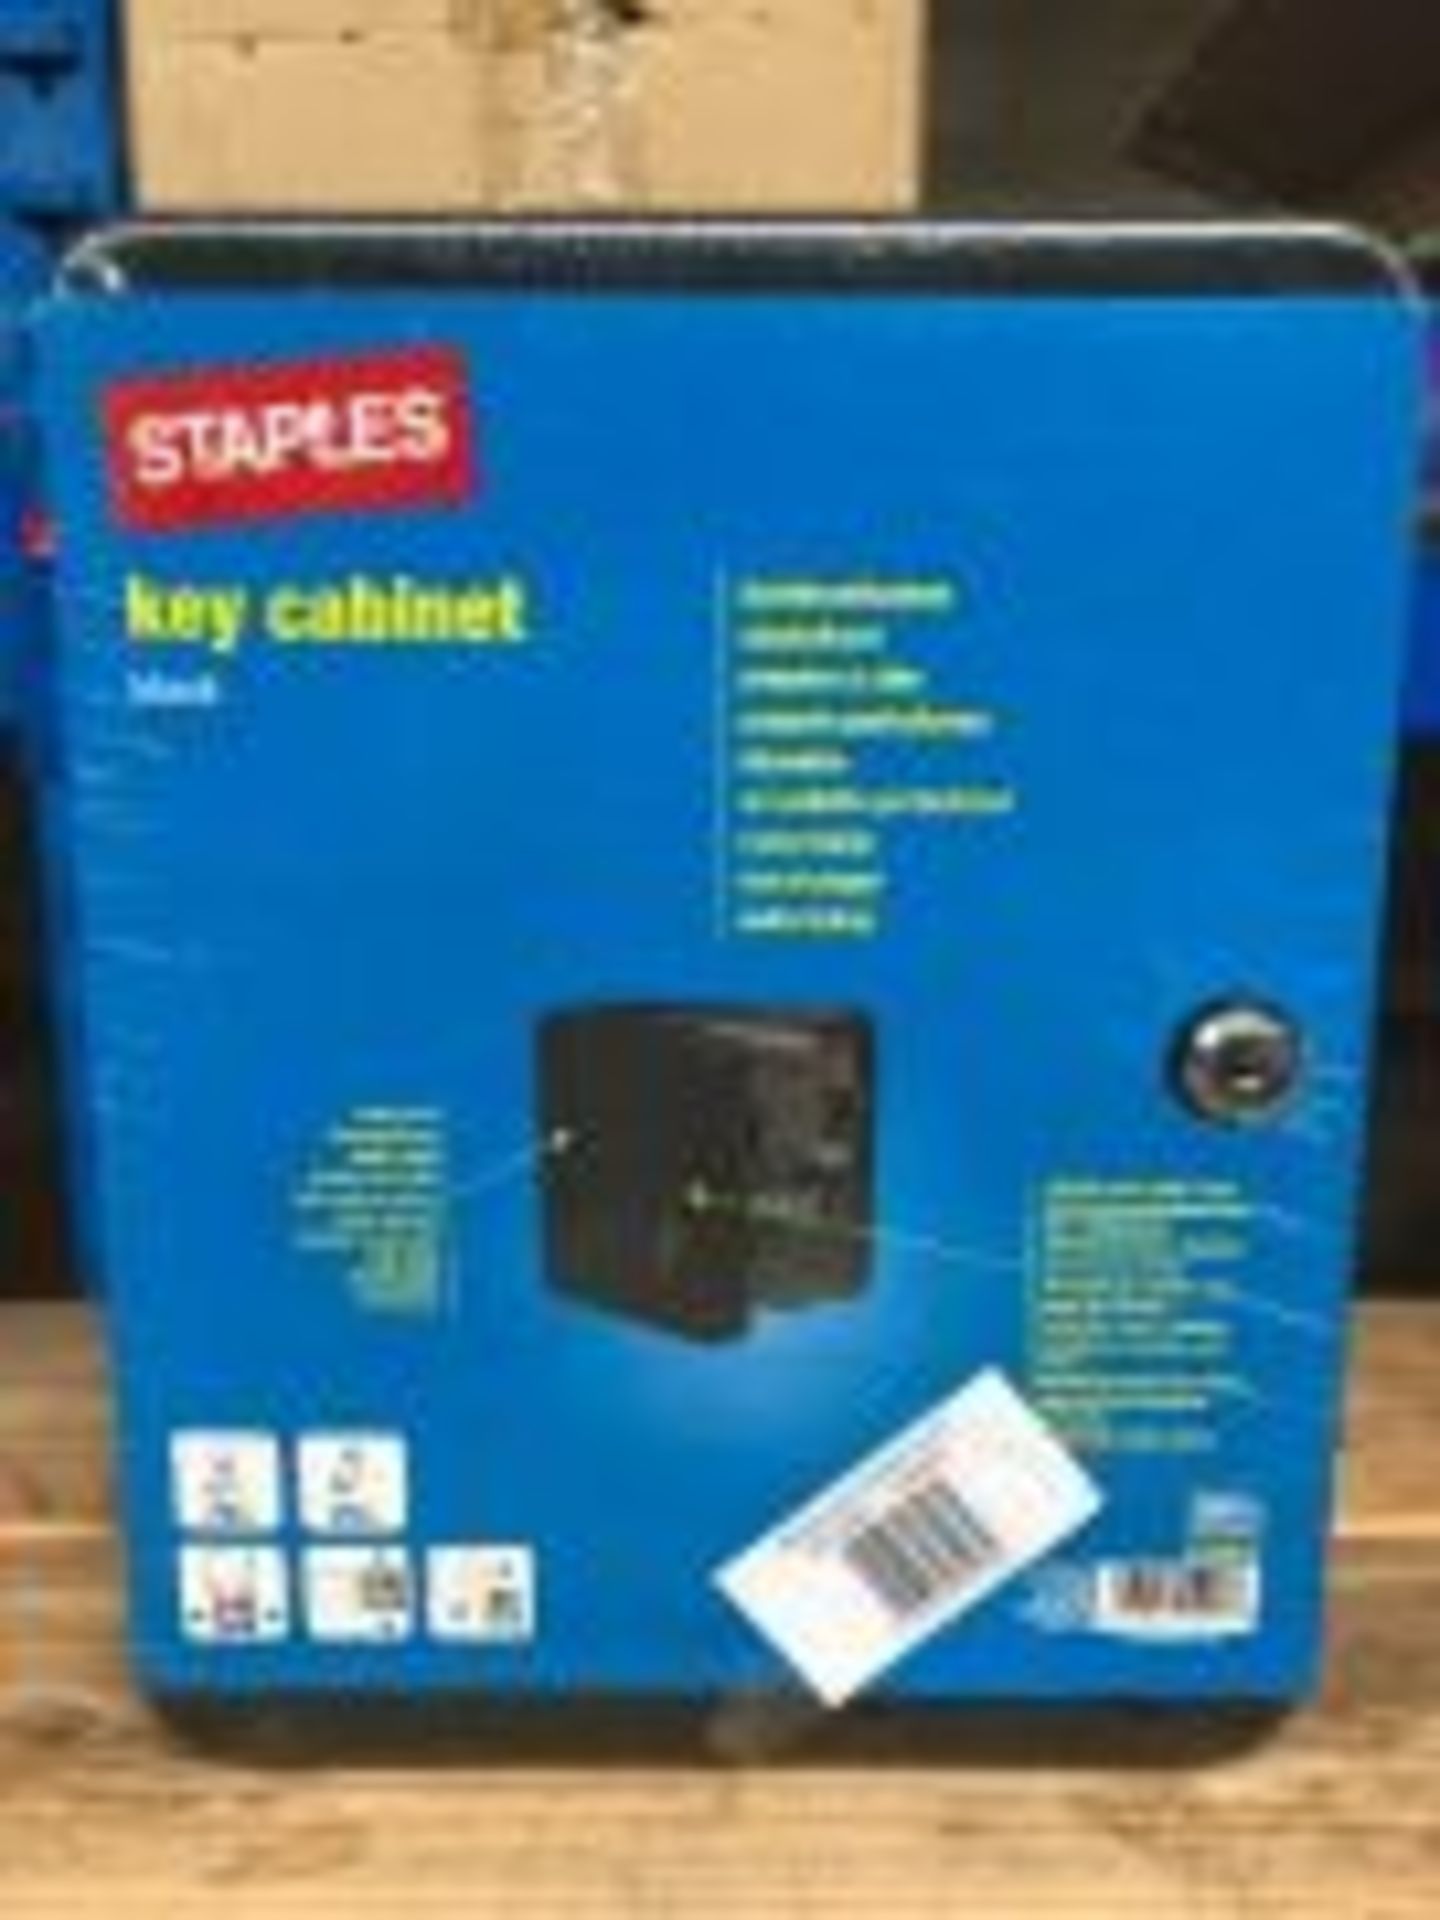 ONE LOT TO CONTAIN SIX STAPLES KEY CABINETS. UNUSED IN ORIGINAL PACKAGING. KEYS INCLUDED. VIEWING